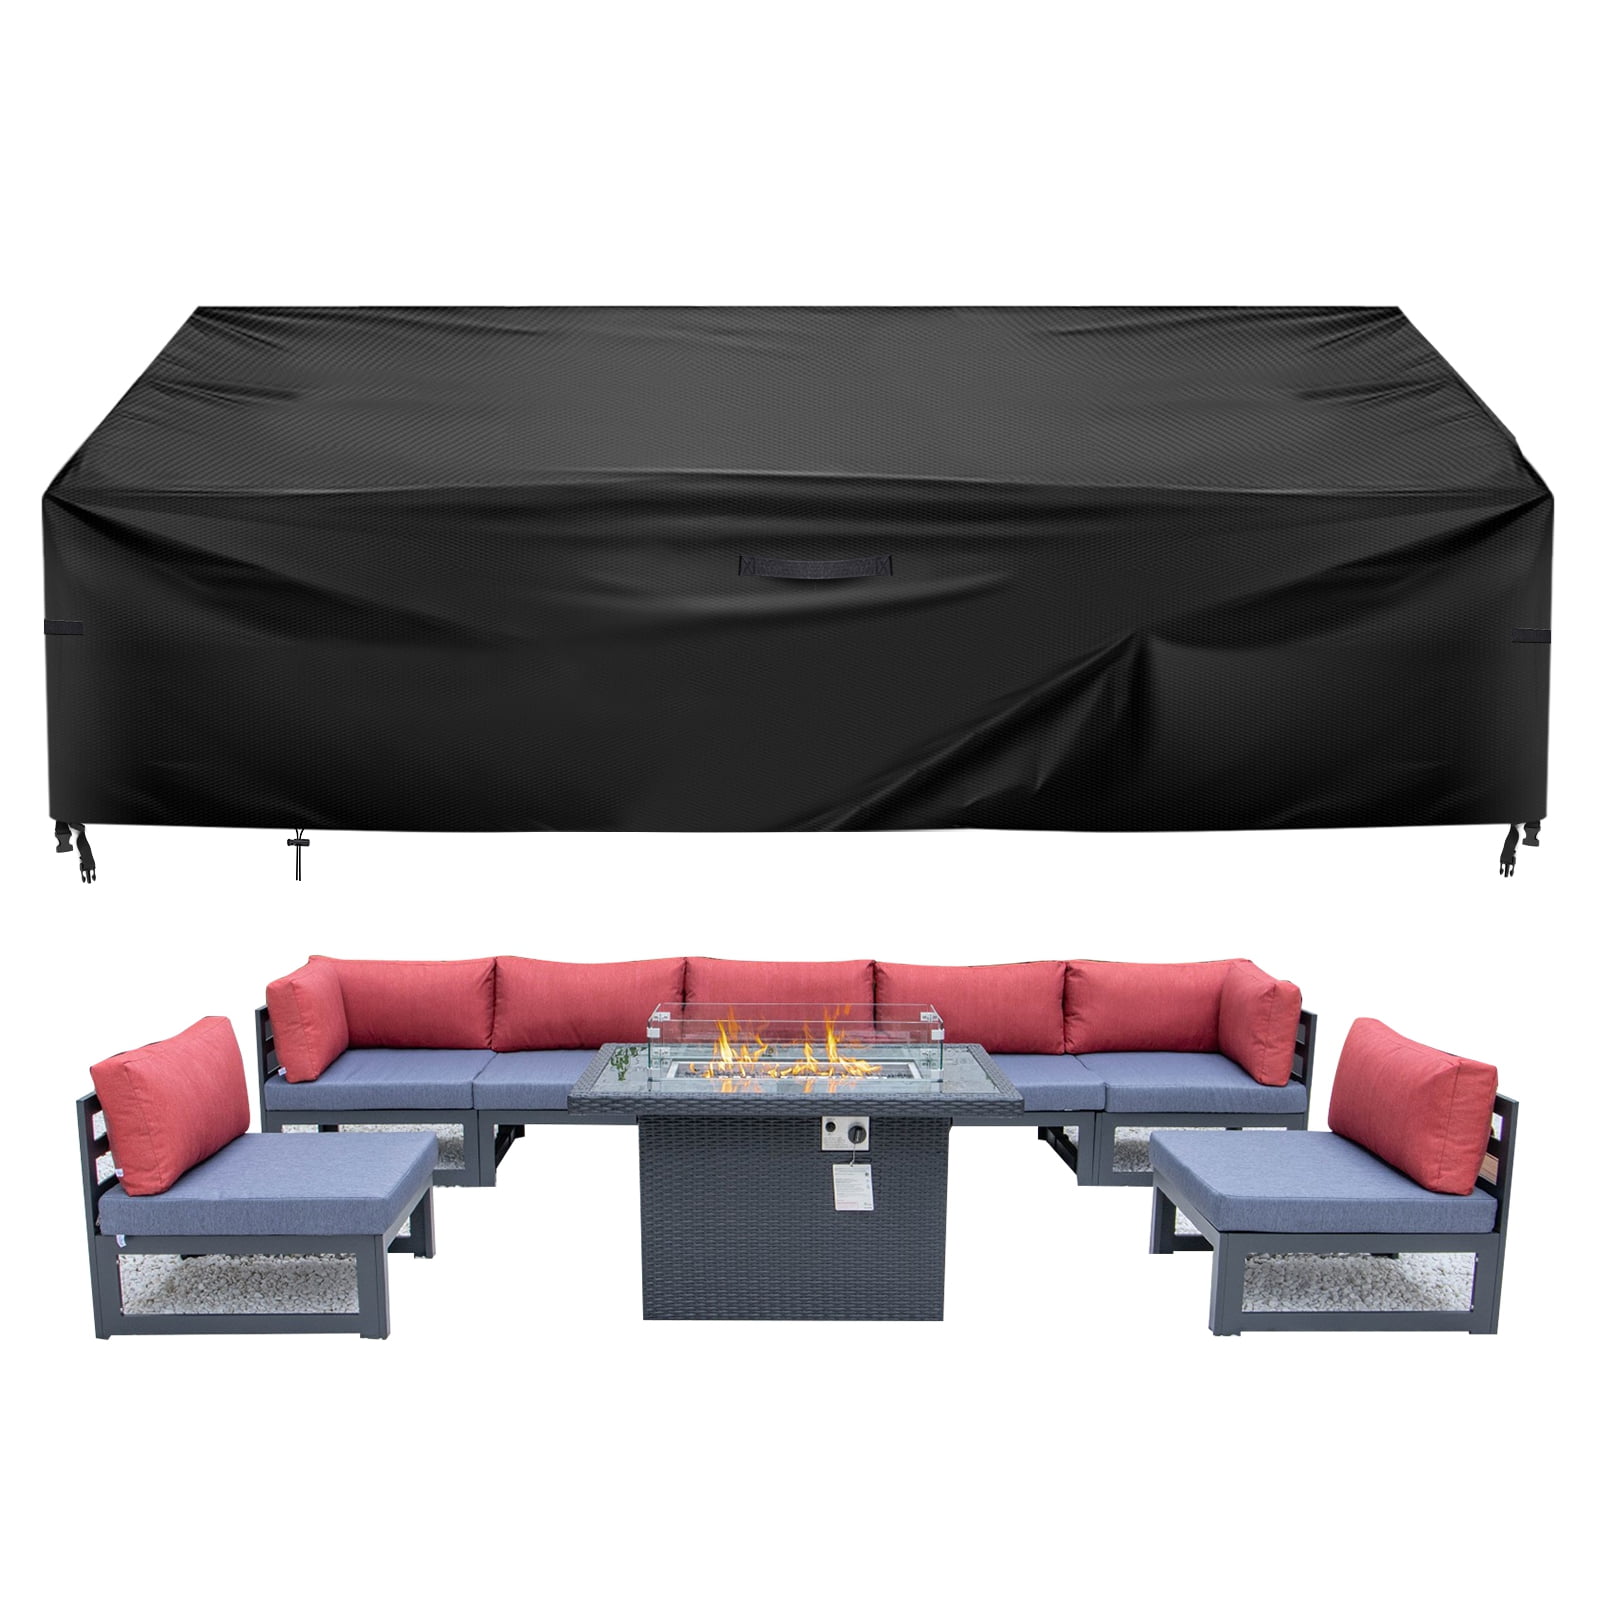 Waterproof Garden Patio Outdoor Furniture Sofa Couch Chair Table Covers Black 